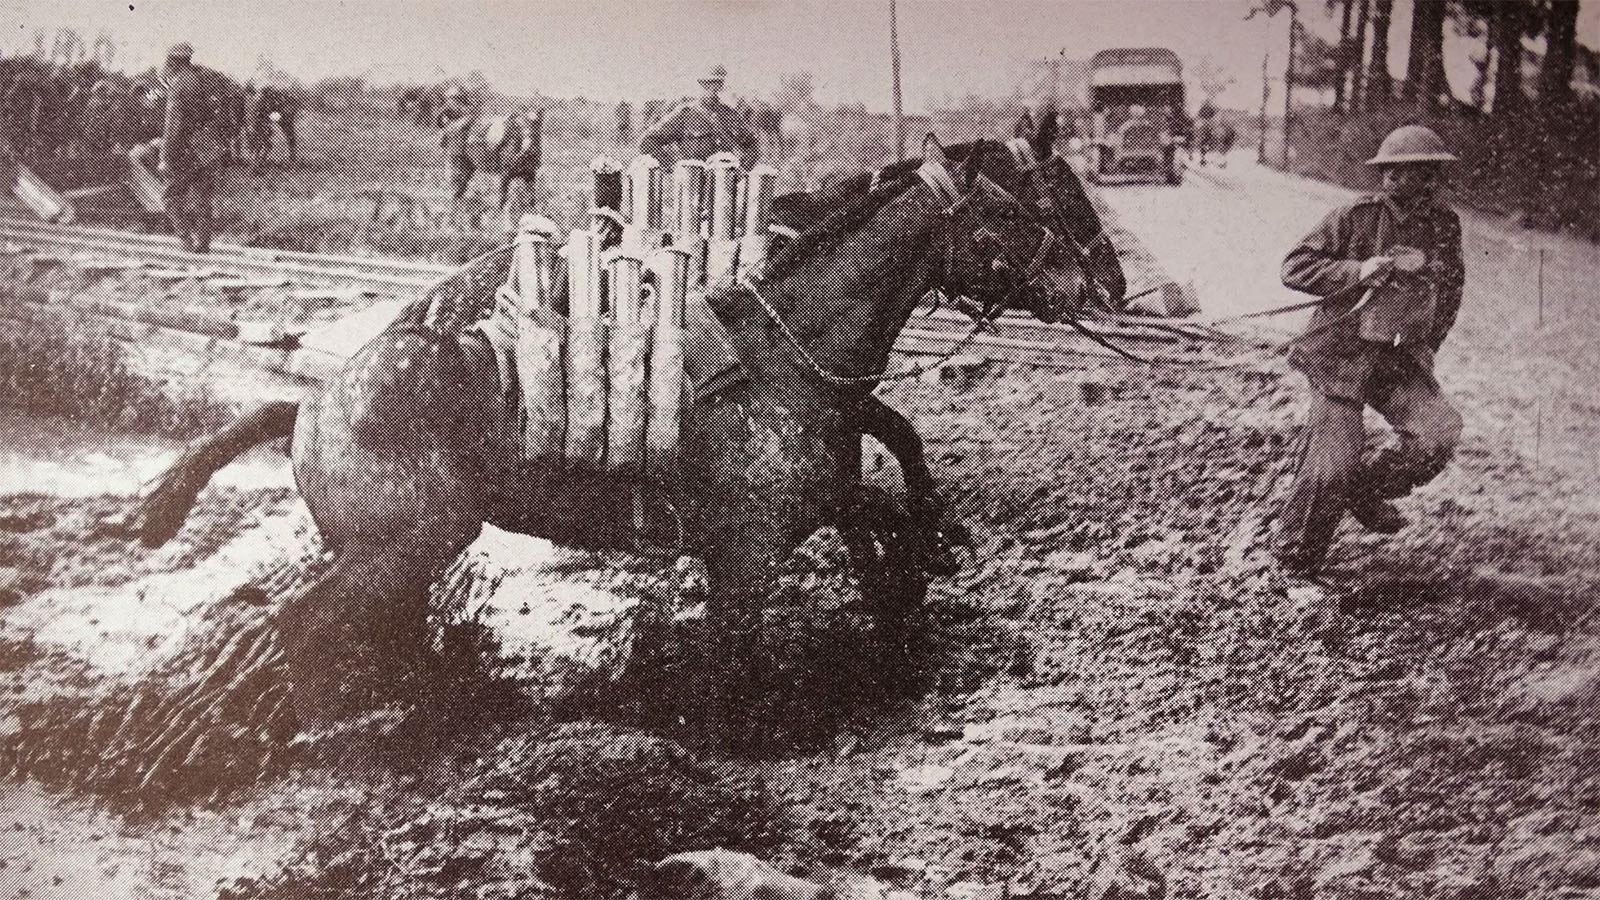 Shell-carrying pack mules had to be led through mud and all kinds of terrain during World War I.